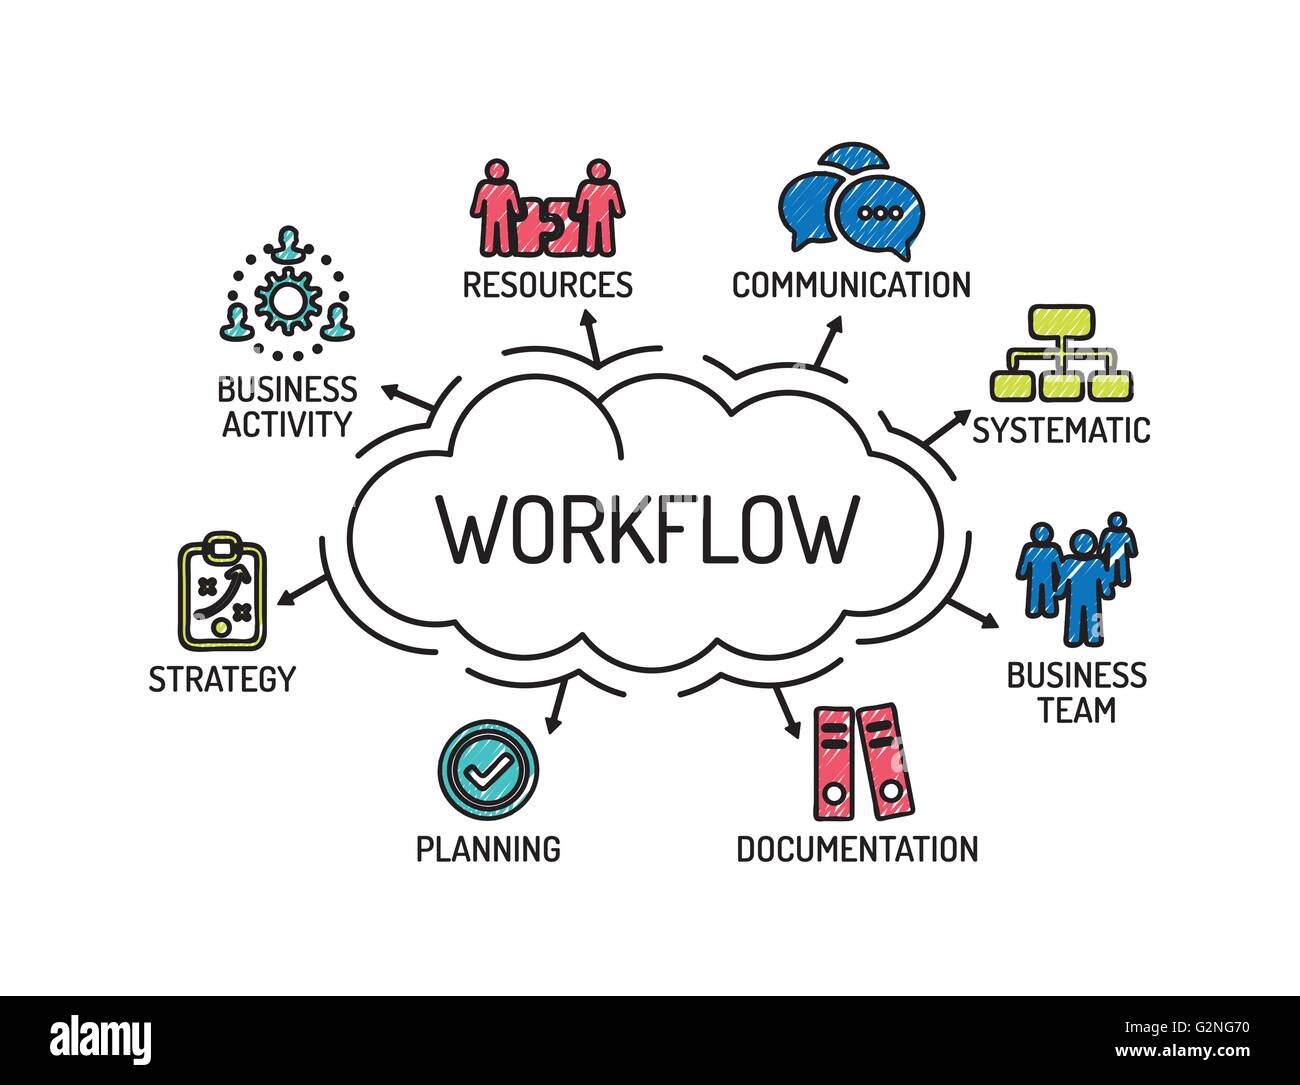 What Is A Workflow Chart